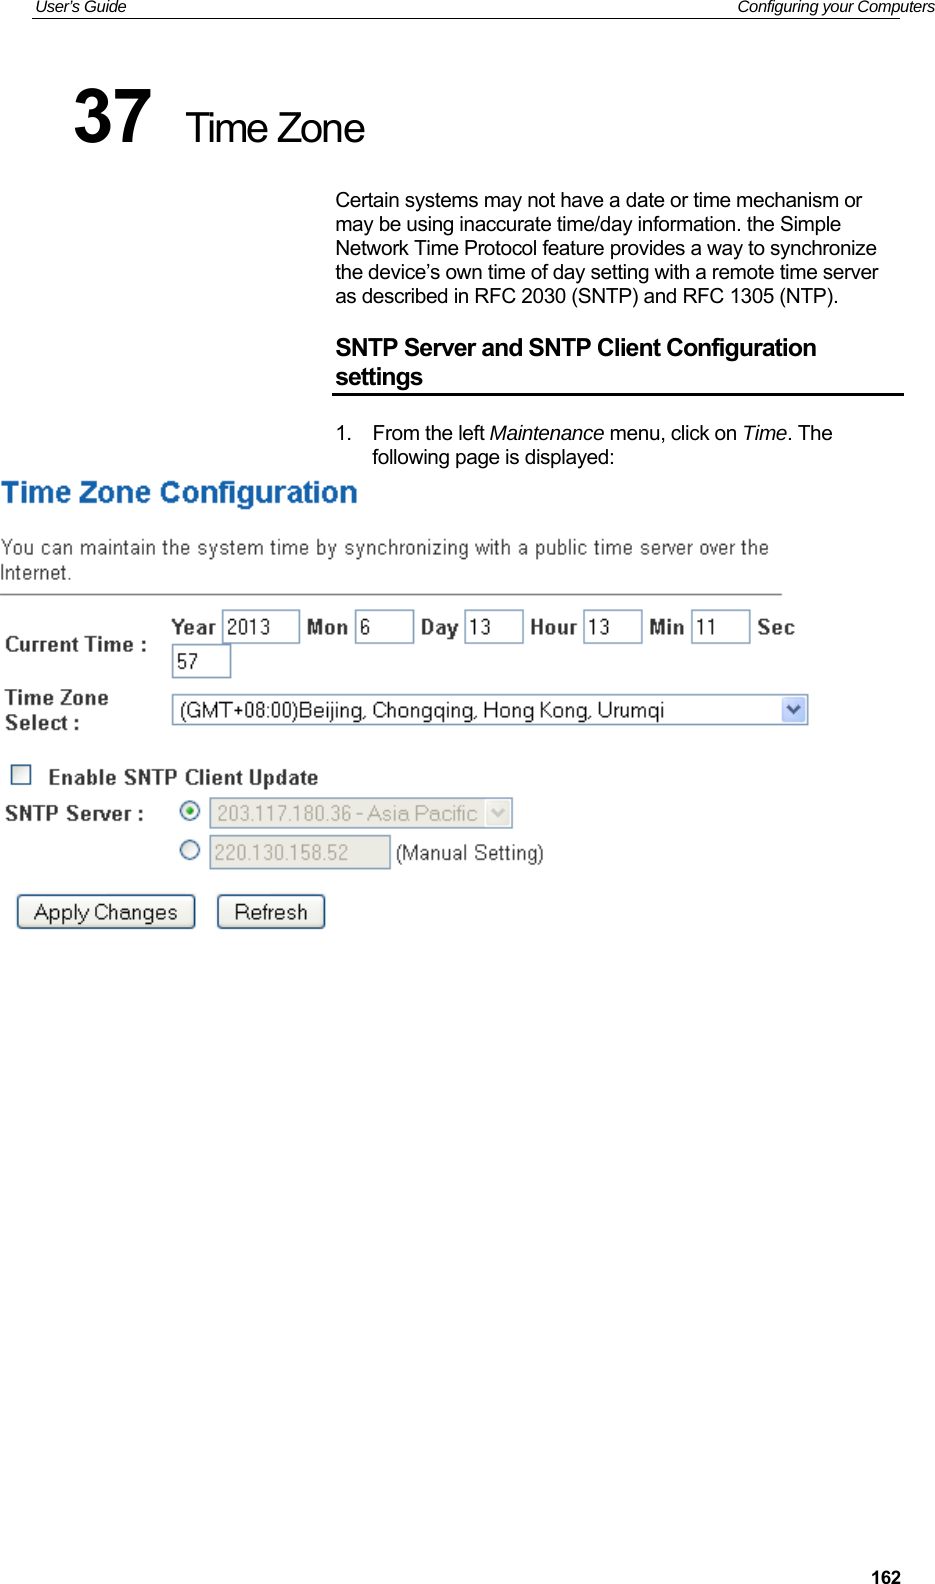 User’s Guide   Configuring your Computers  16237  Time Zone Certain systems may not have a date or time mechanism or may be using inaccurate time/day information. the Simple Network Time Protocol feature provides a way to synchronize the device’s own time of day setting with a remote time server as described in RFC 2030 (SNTP) and RFC 1305 (NTP). SNTP Server and SNTP Client Configuration settings 1.  From the left Maintenance menu, click on Time. The following page is displayed:                     